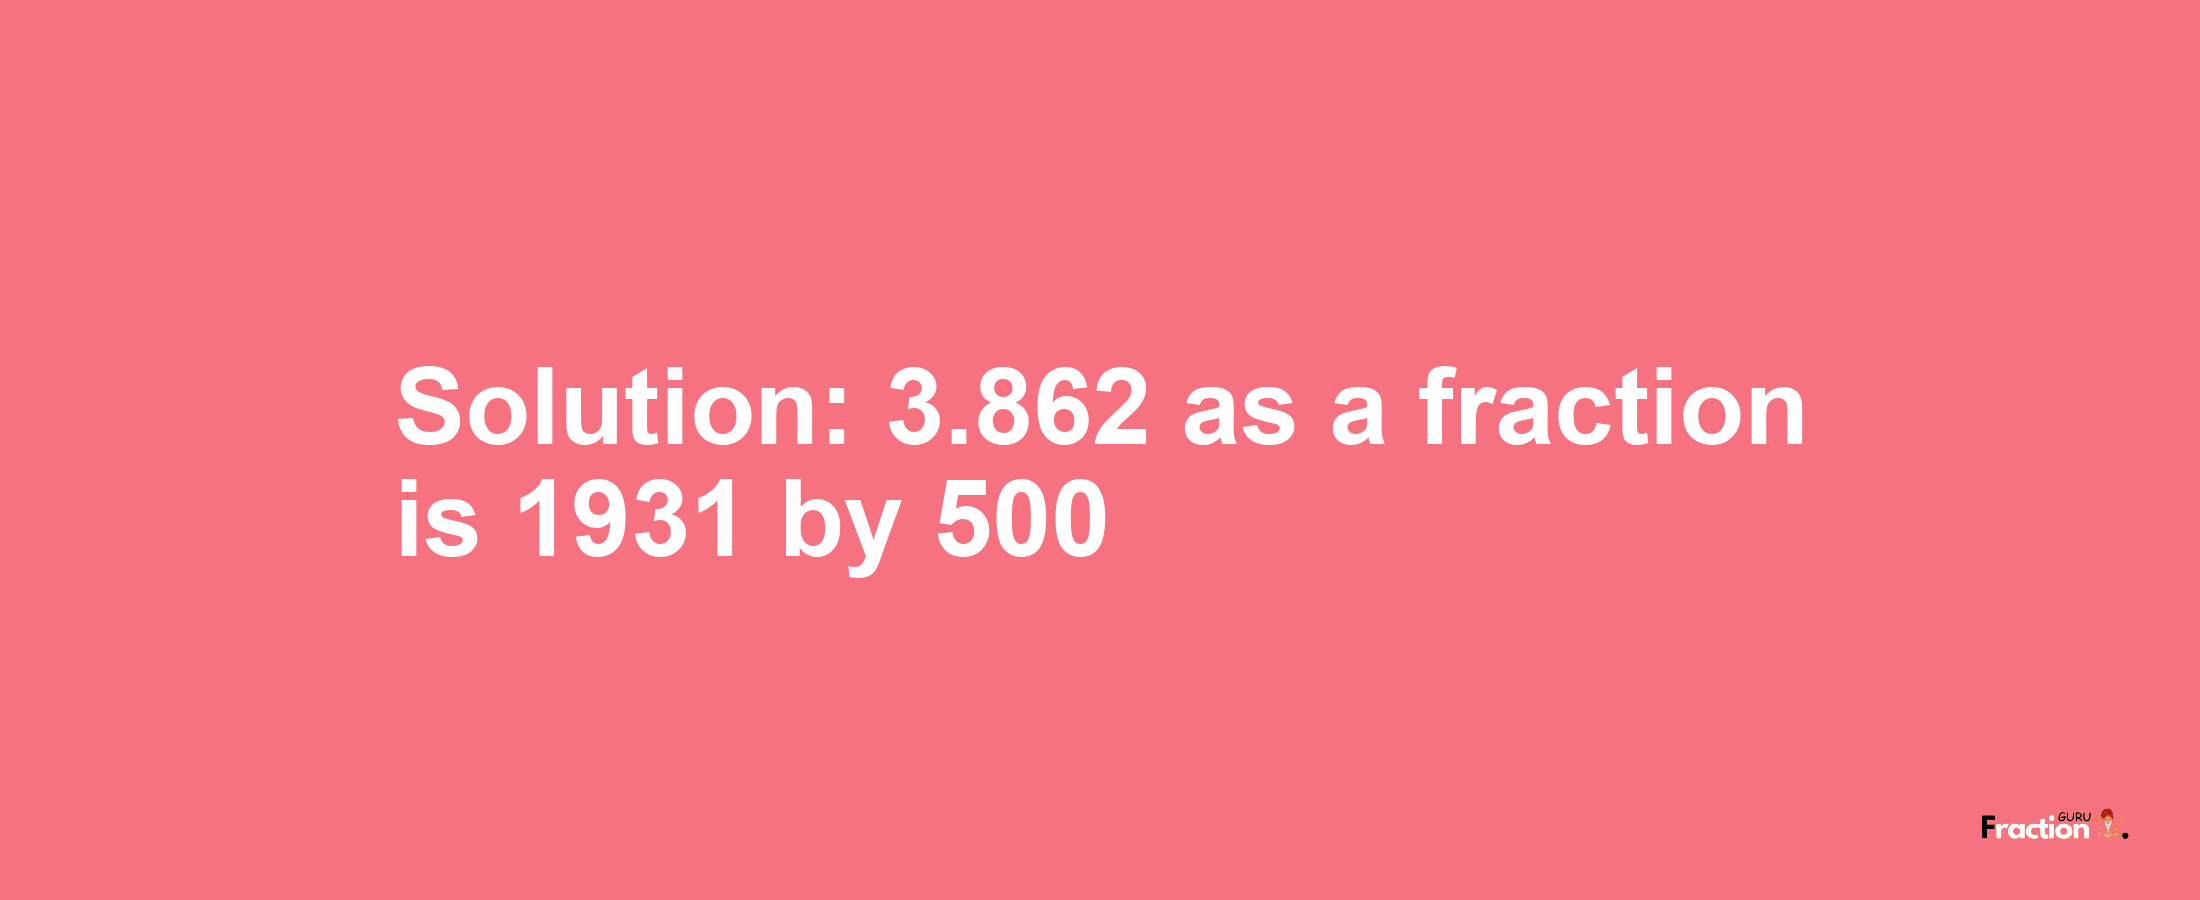 Solution:3.862 as a fraction is 1931/500